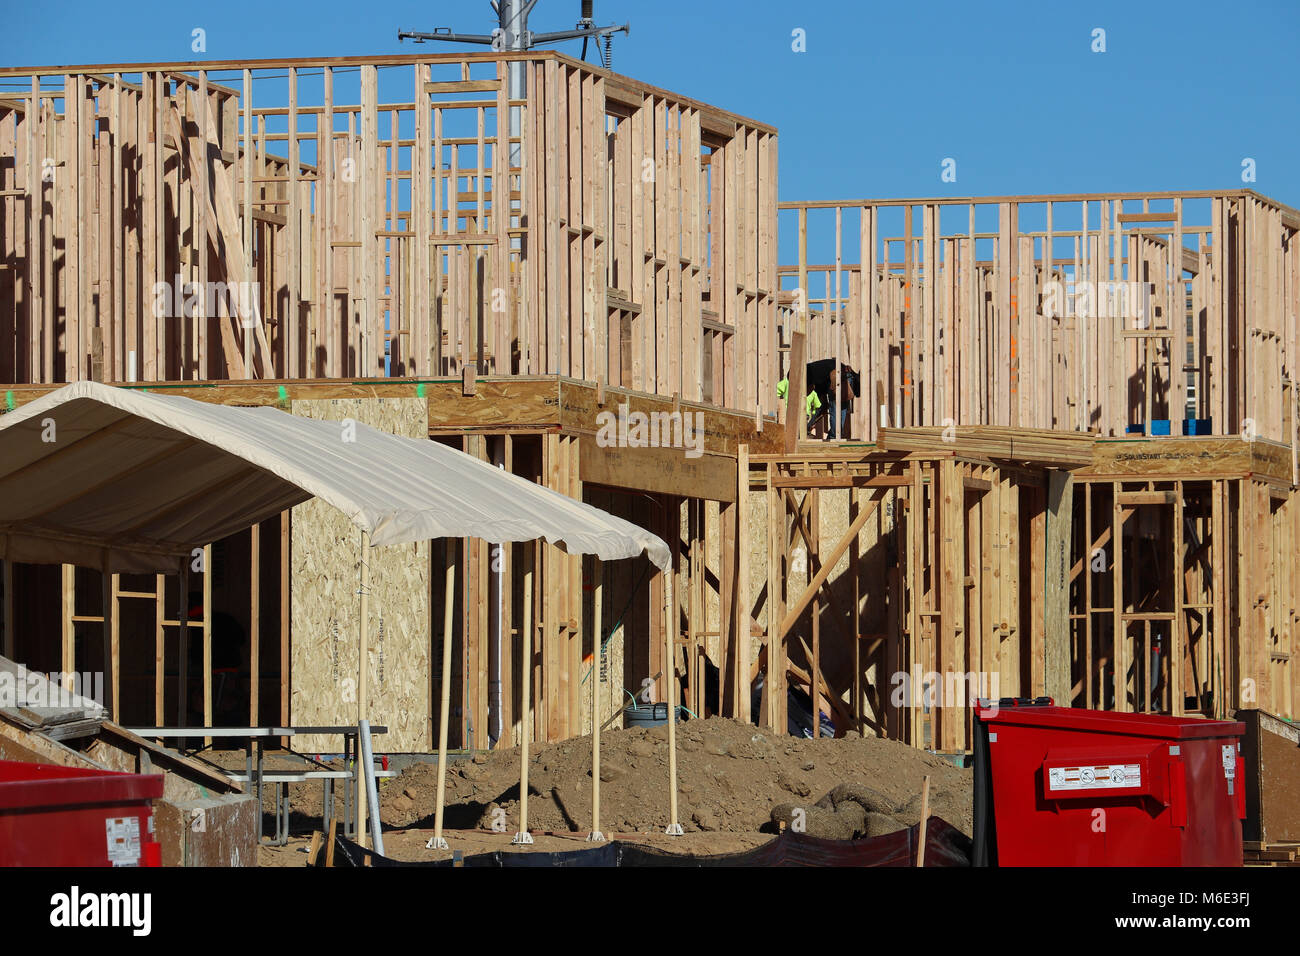 Several new two-story homes under construction, just framed, with skeletal walls built of 2 x 4 lumber; blue sky, red dumpster, shade, on sunny day. Stock Photo